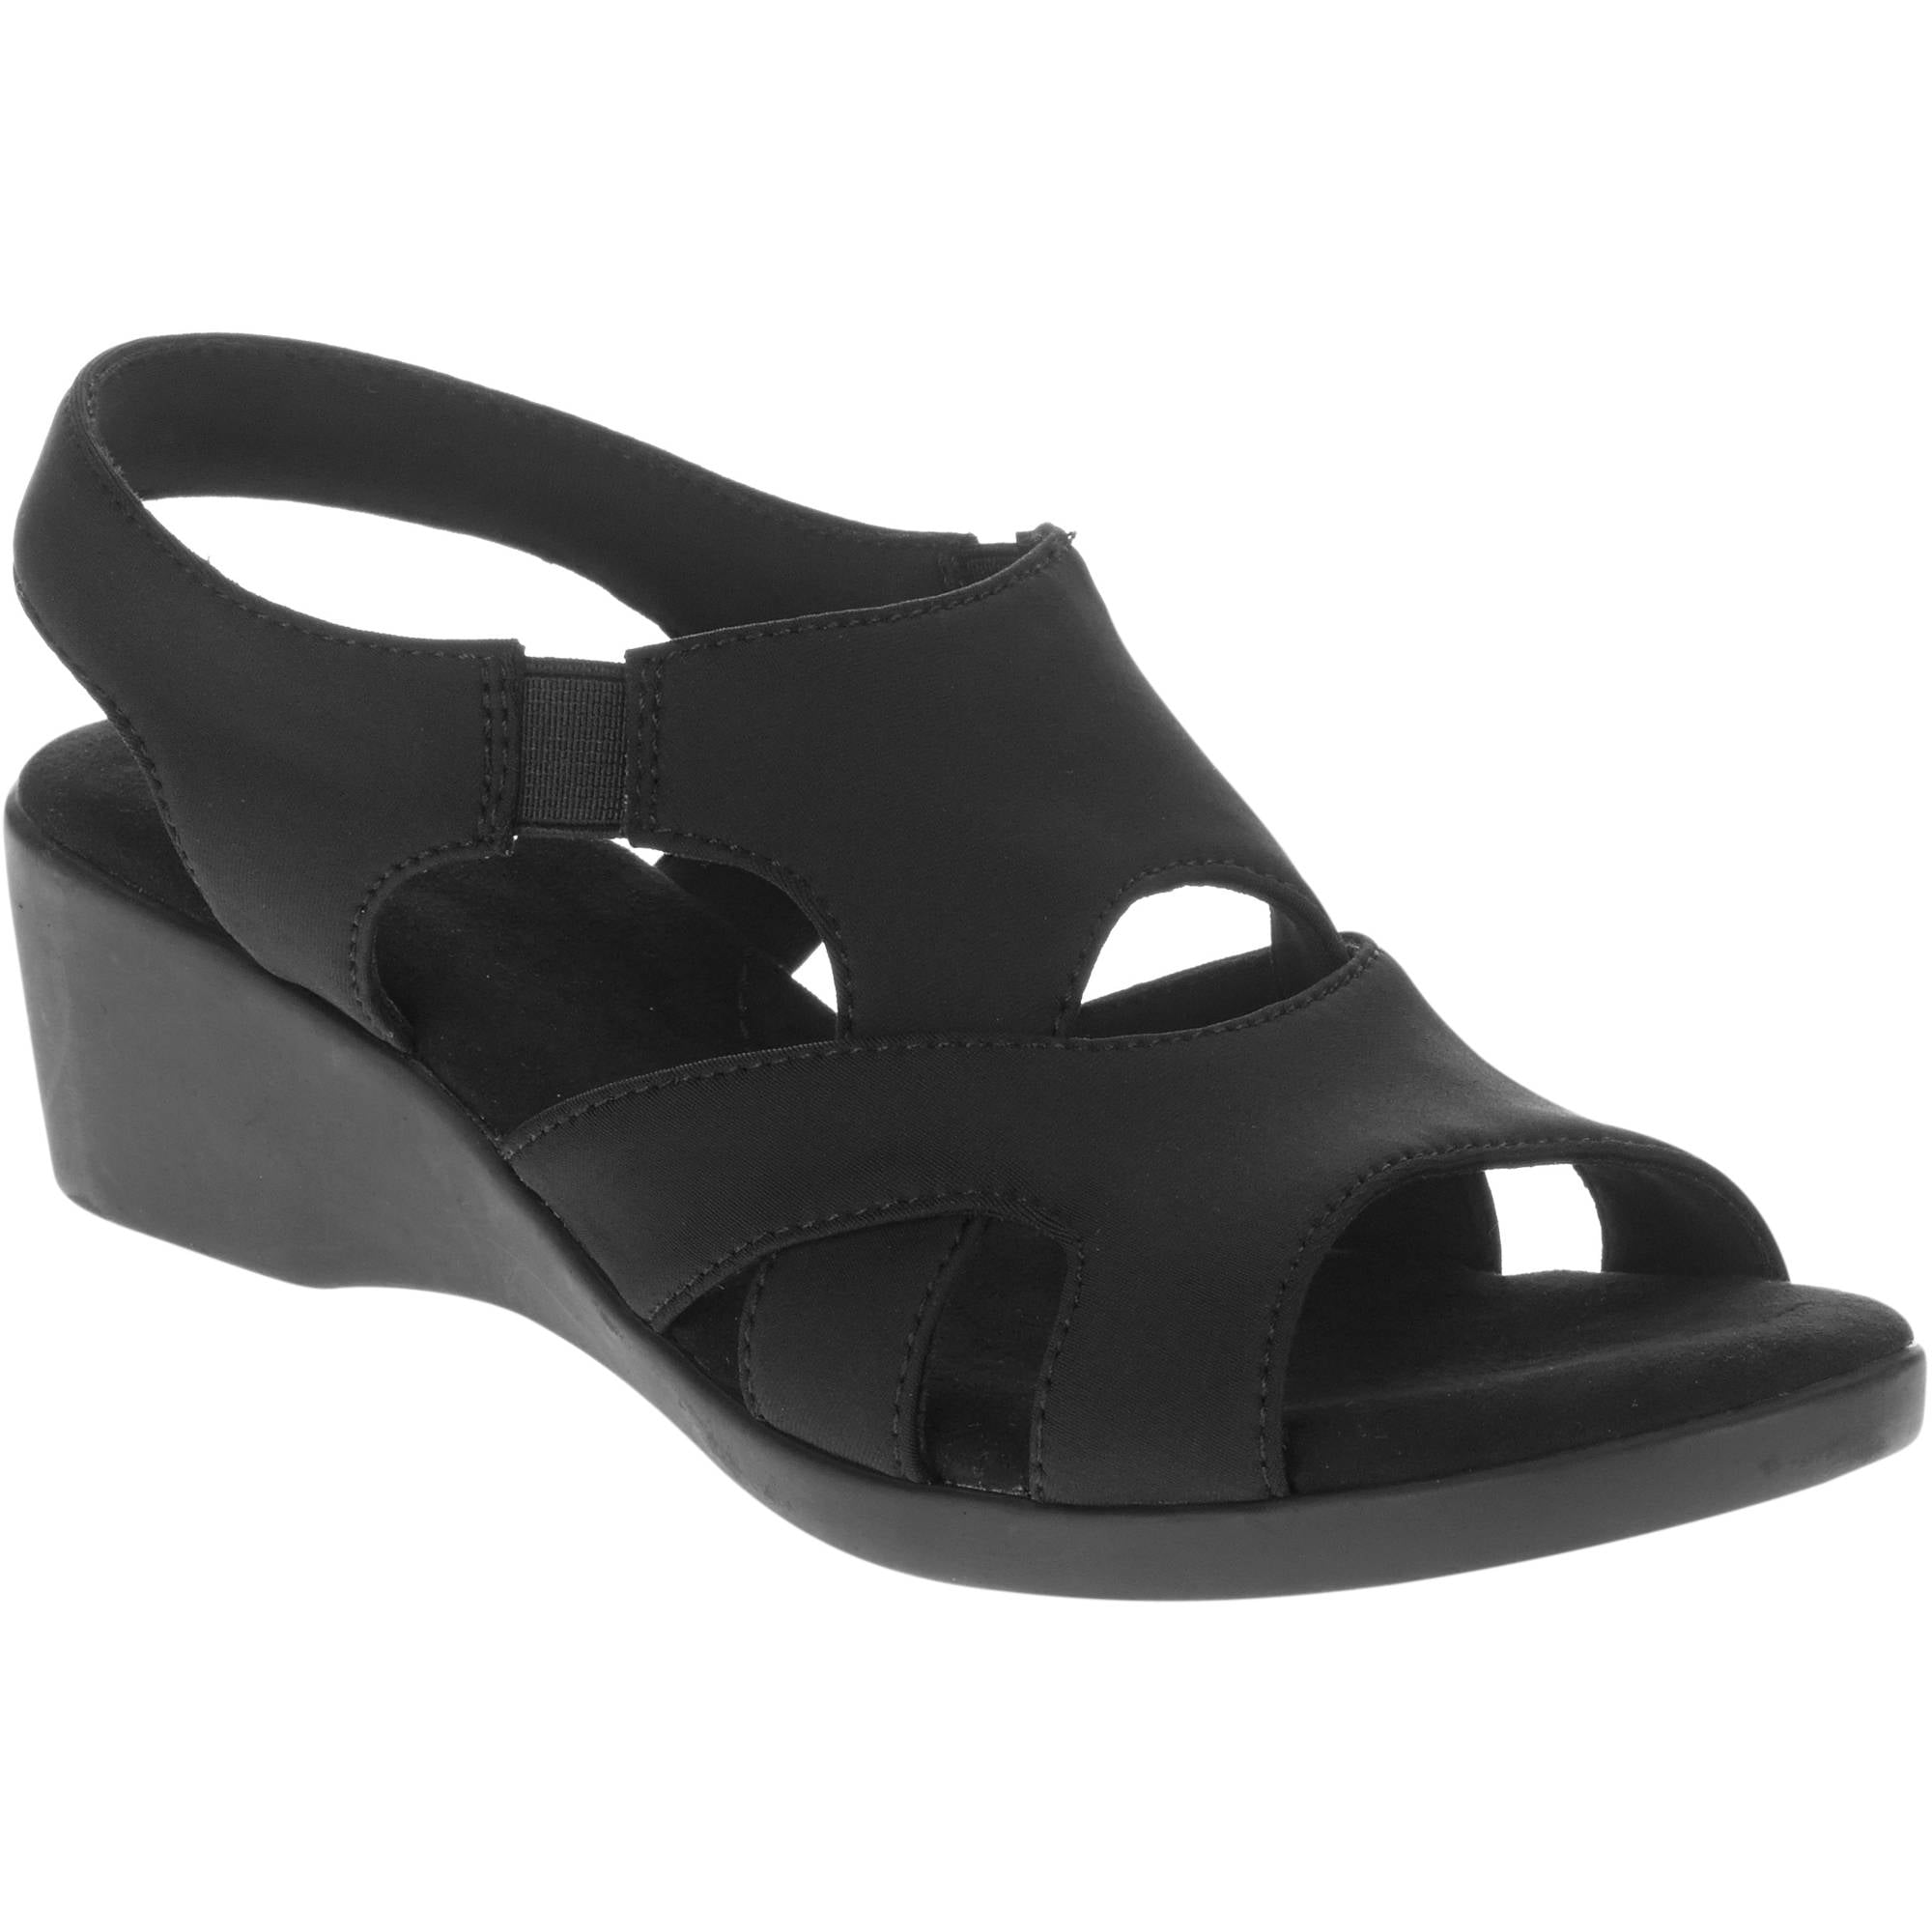 Indifference mineral Revenue Womens Faded Glory Comfort Wedge - Walmart.com